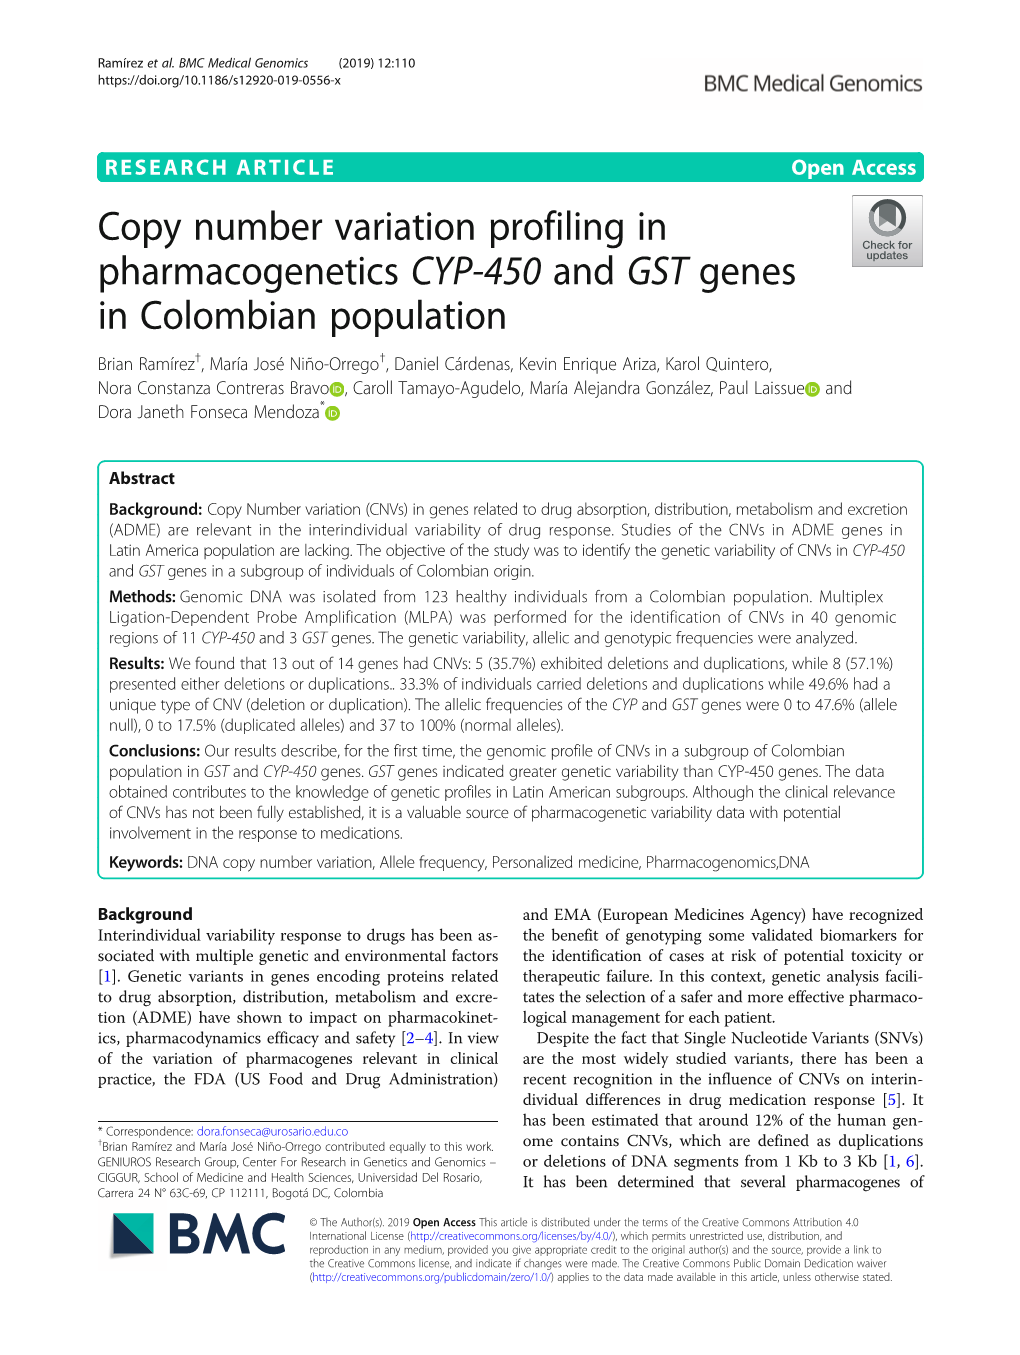 Copy Number Variation Profiling in Pharmacogenetics CYP-450 And